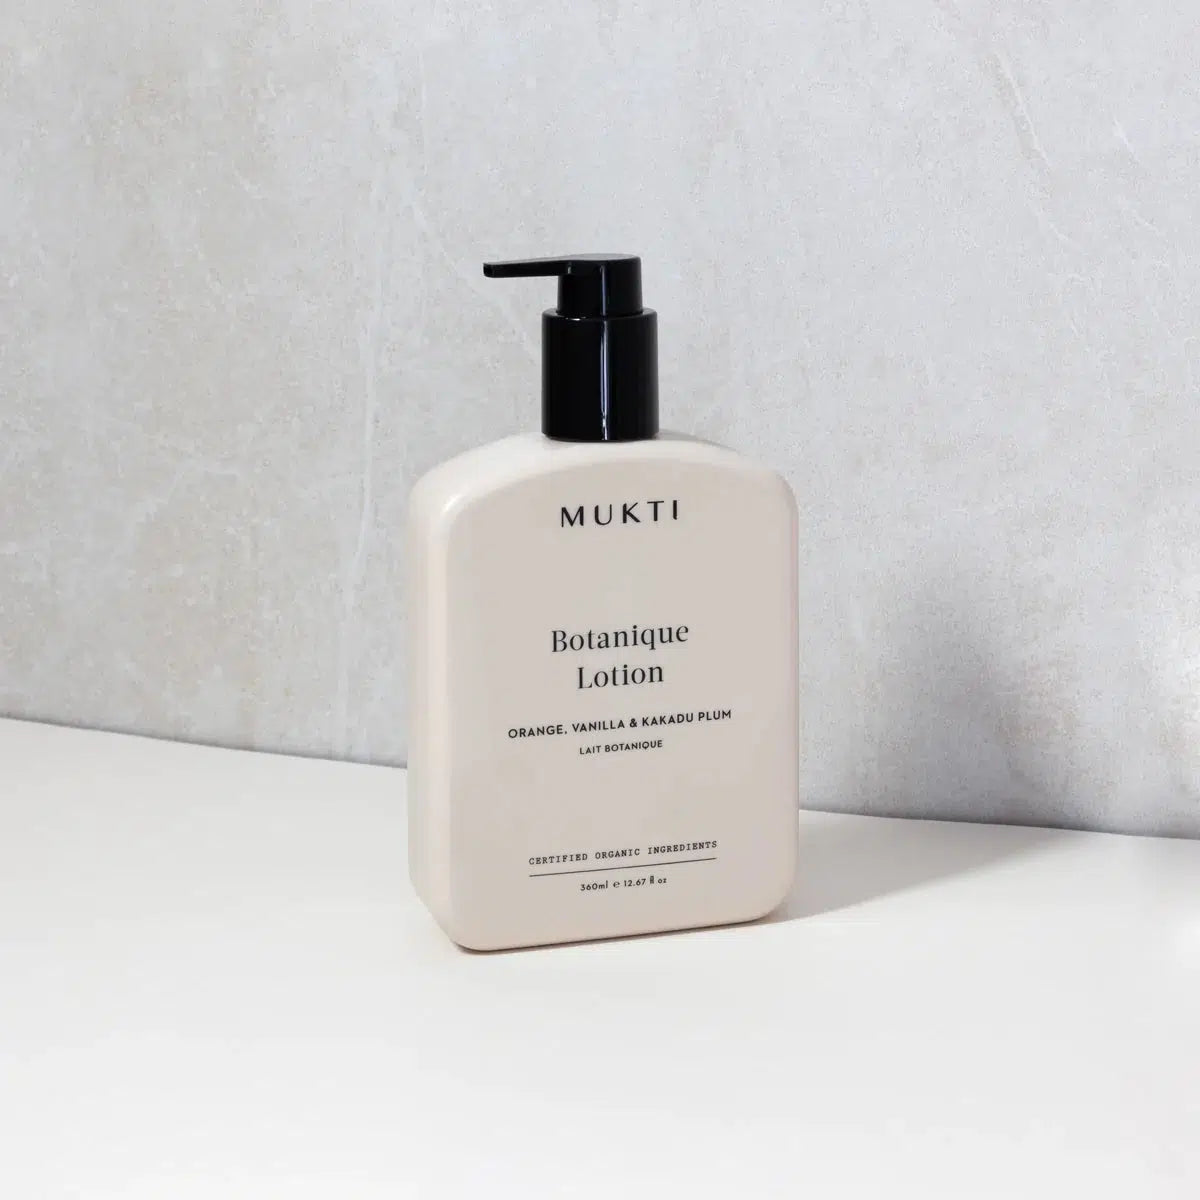 Mukti - Botanique Lotion - The Bare Theory